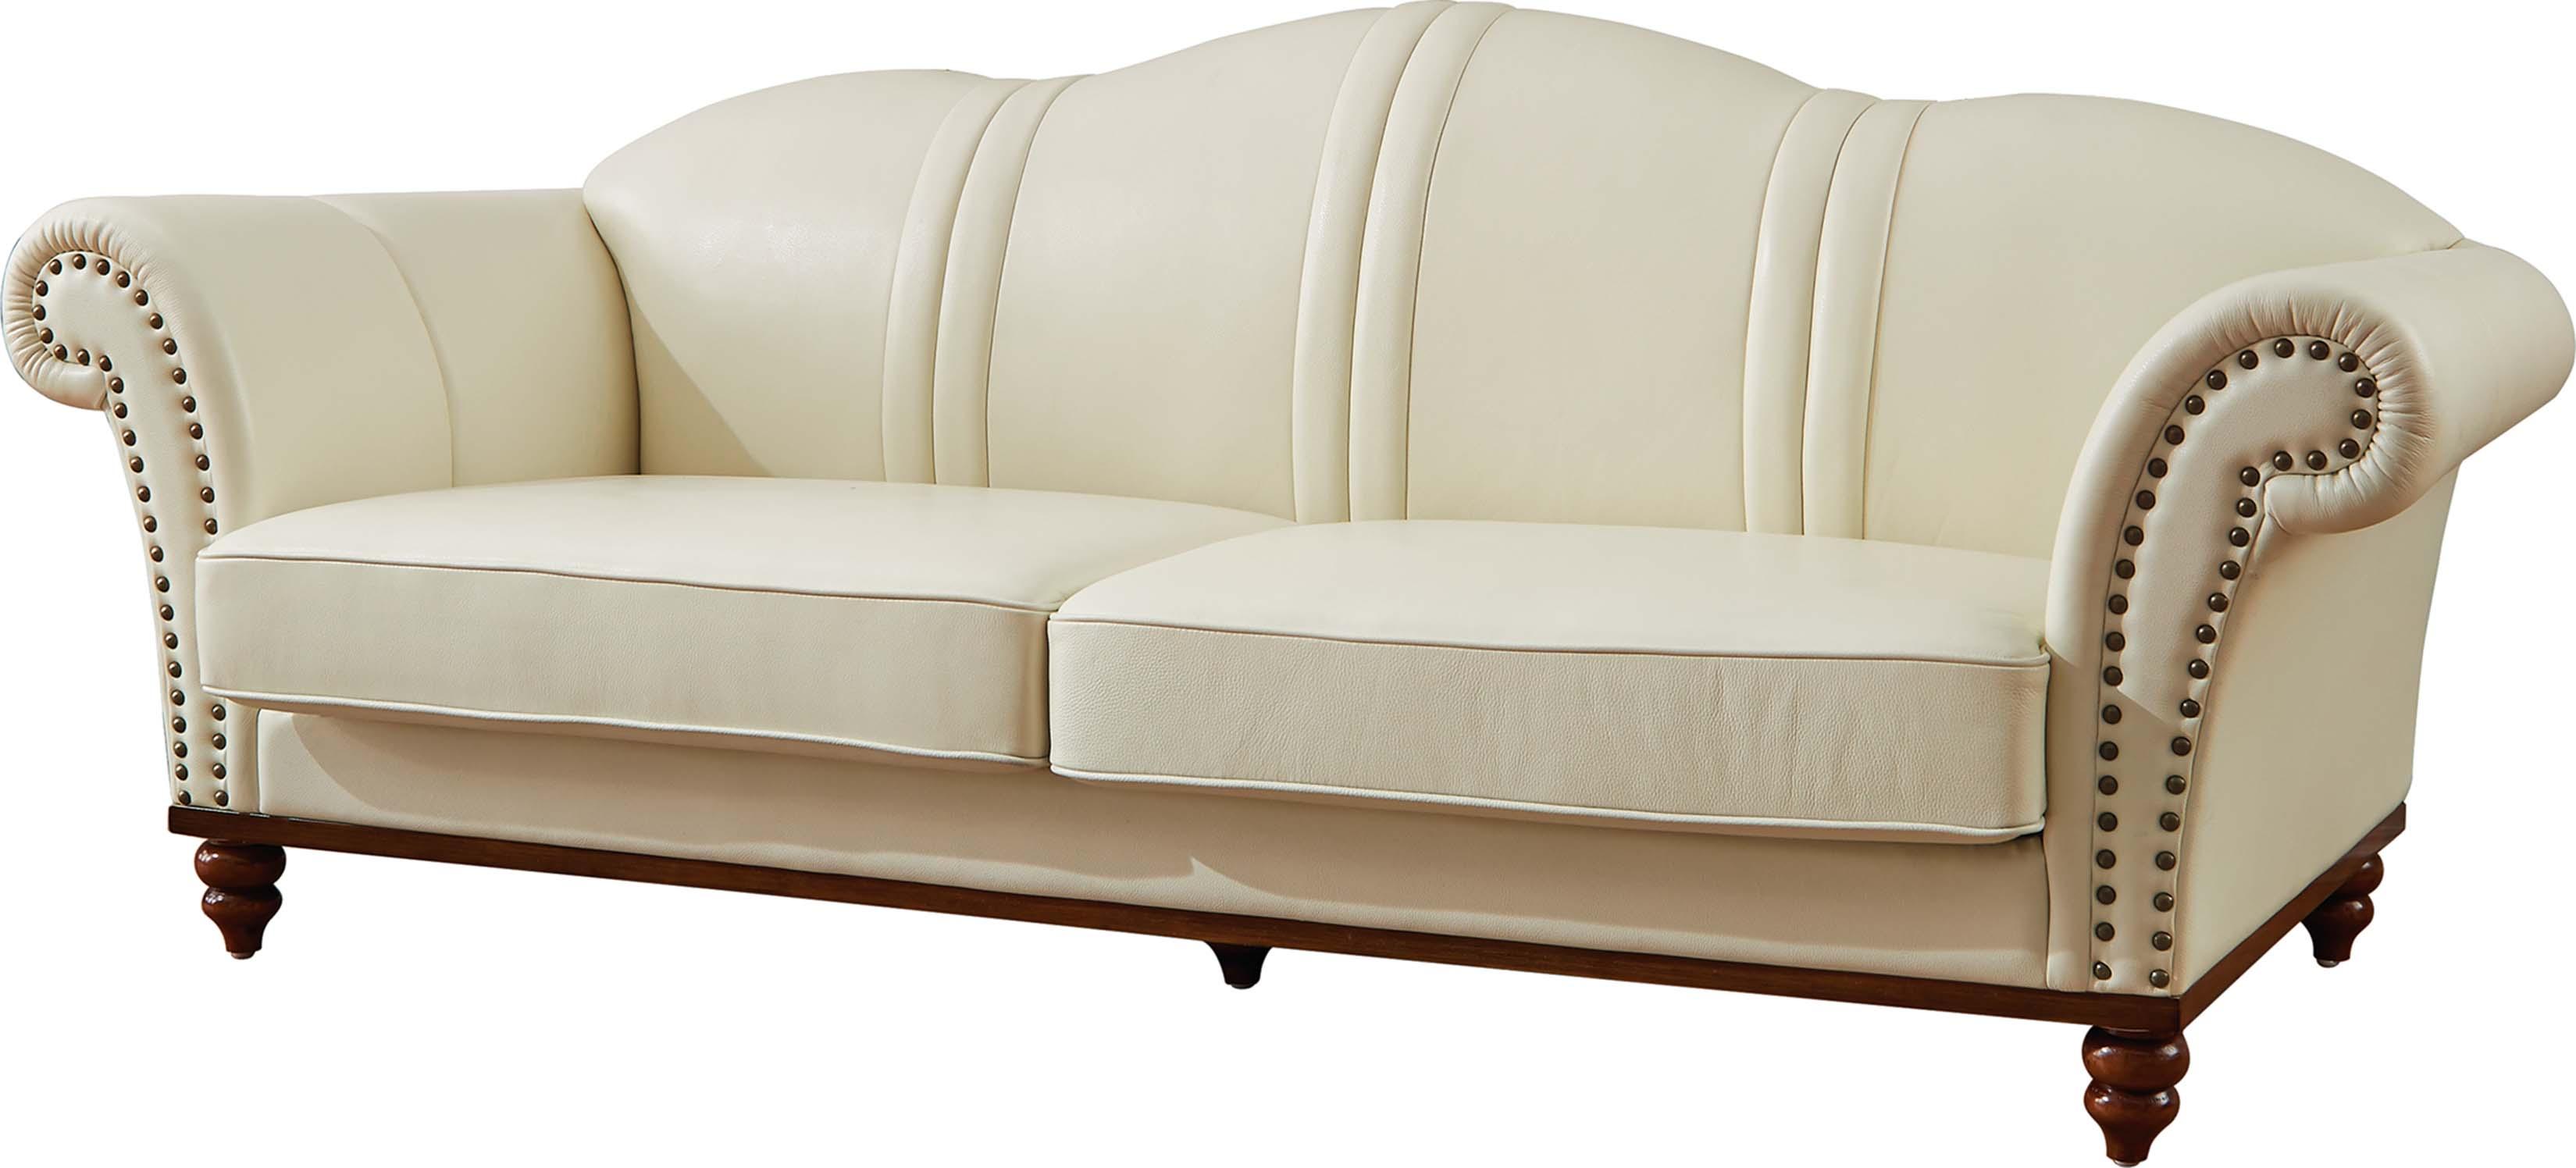 

    
ESF 2601 Sofa Loveseat and Chair Set Ivory ESF 2601 Ivory-Sofa Set-3
